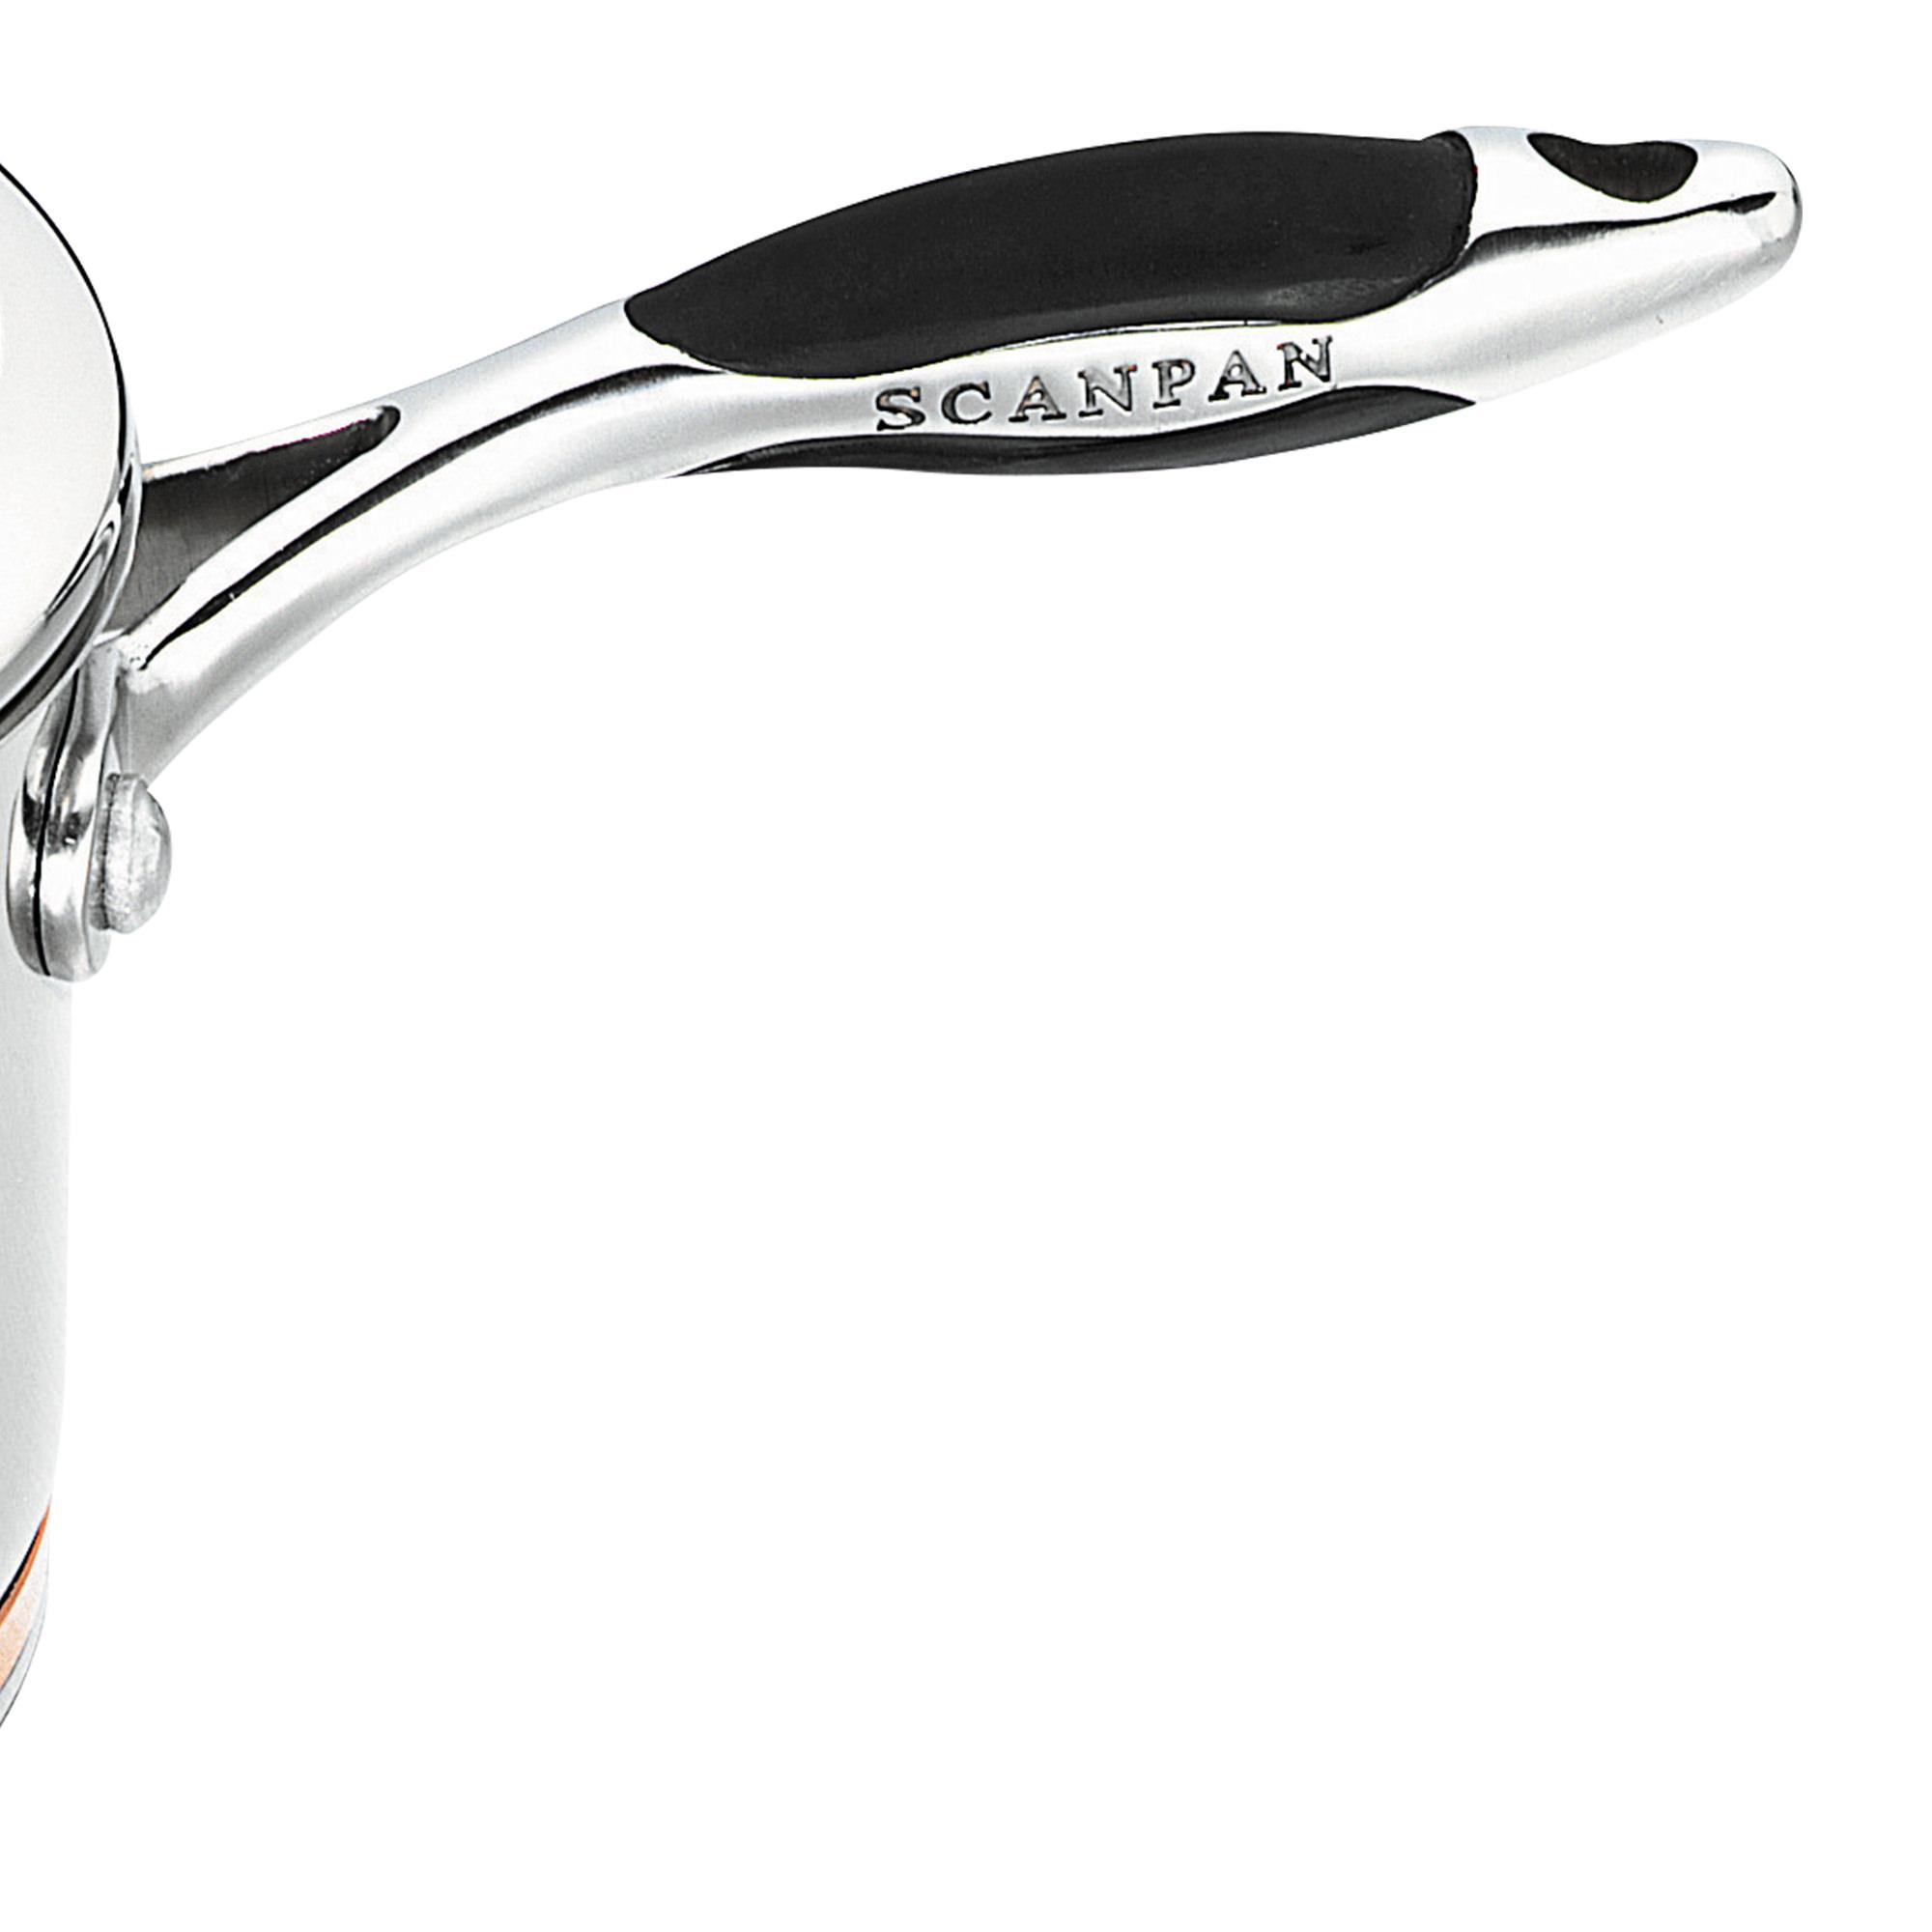 Scanpan Coppernox Stainless Steel Covered Saucepan 14cm - 1.2L Image 3